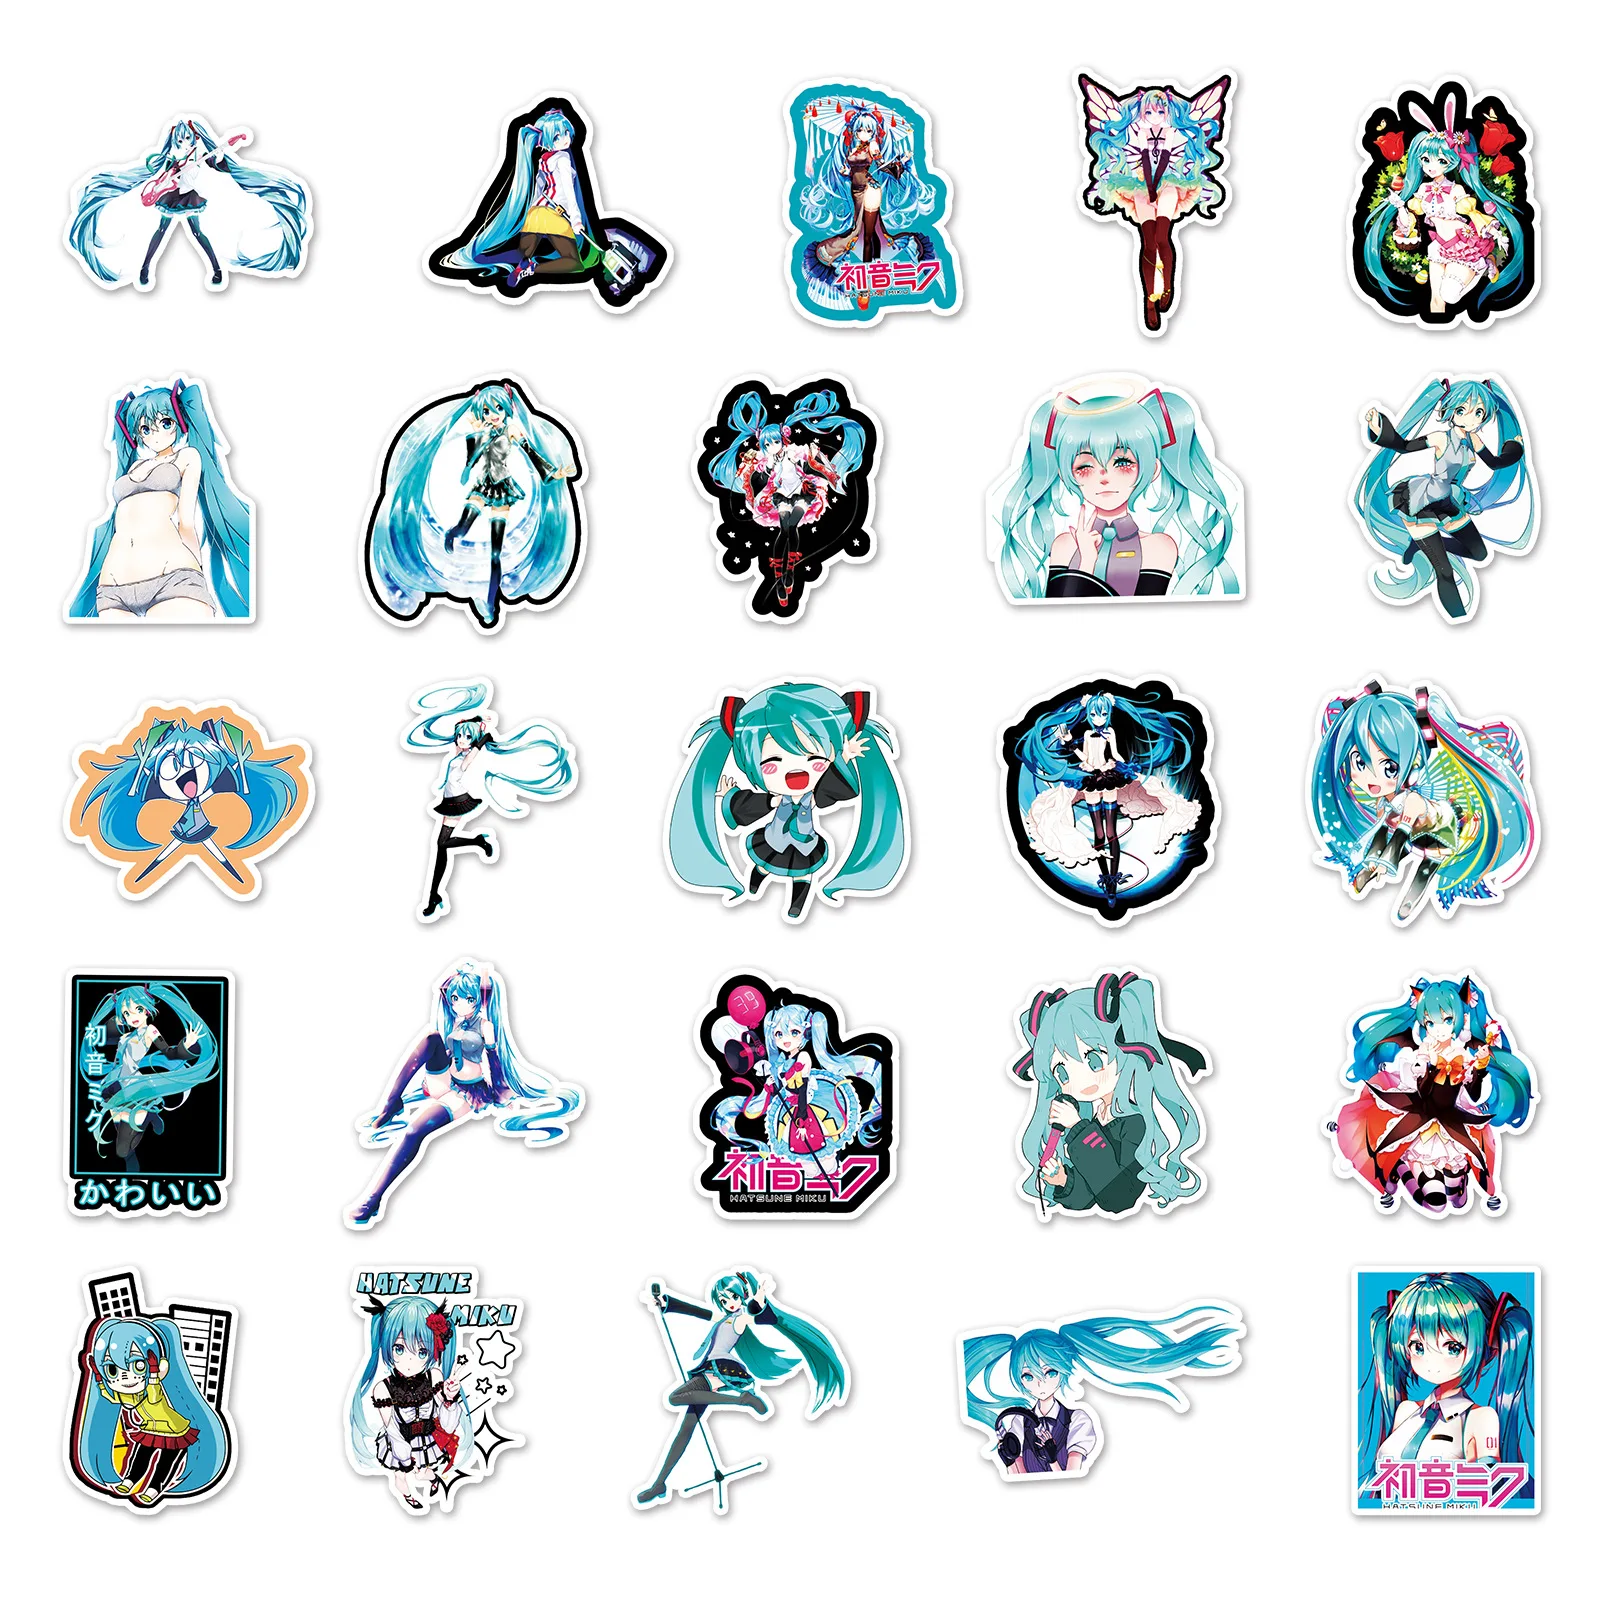 Anime Girls Hatsune Miku 40 Piece Themed Sticker Decal Set for Kids Adults - Laptop Motorcycle Skateboard Decals